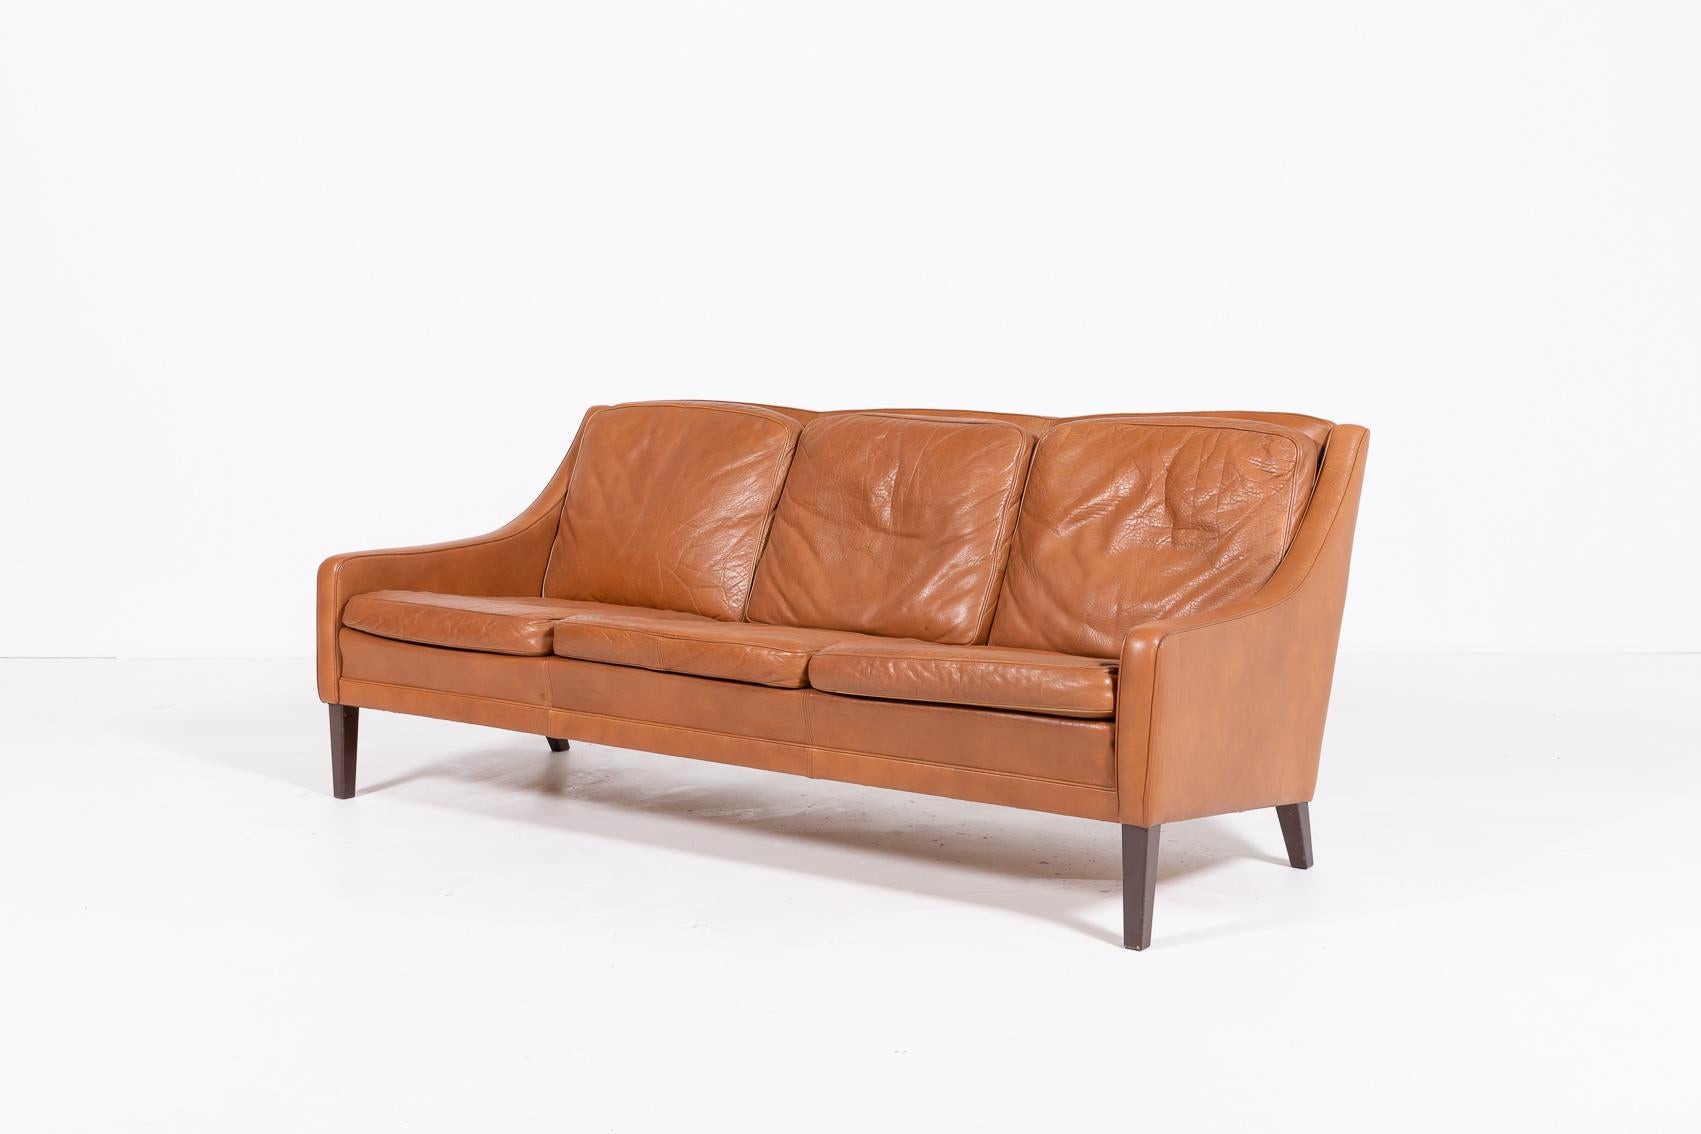 Danish Modern three-seat cognac leather sofa on varnished wood legs, loose cushions.

Condition
Good, age related wear and patina.

Dimensions
width: 180 cm
depth: 82 cm
height: 78 cm
seat height: 41 cm